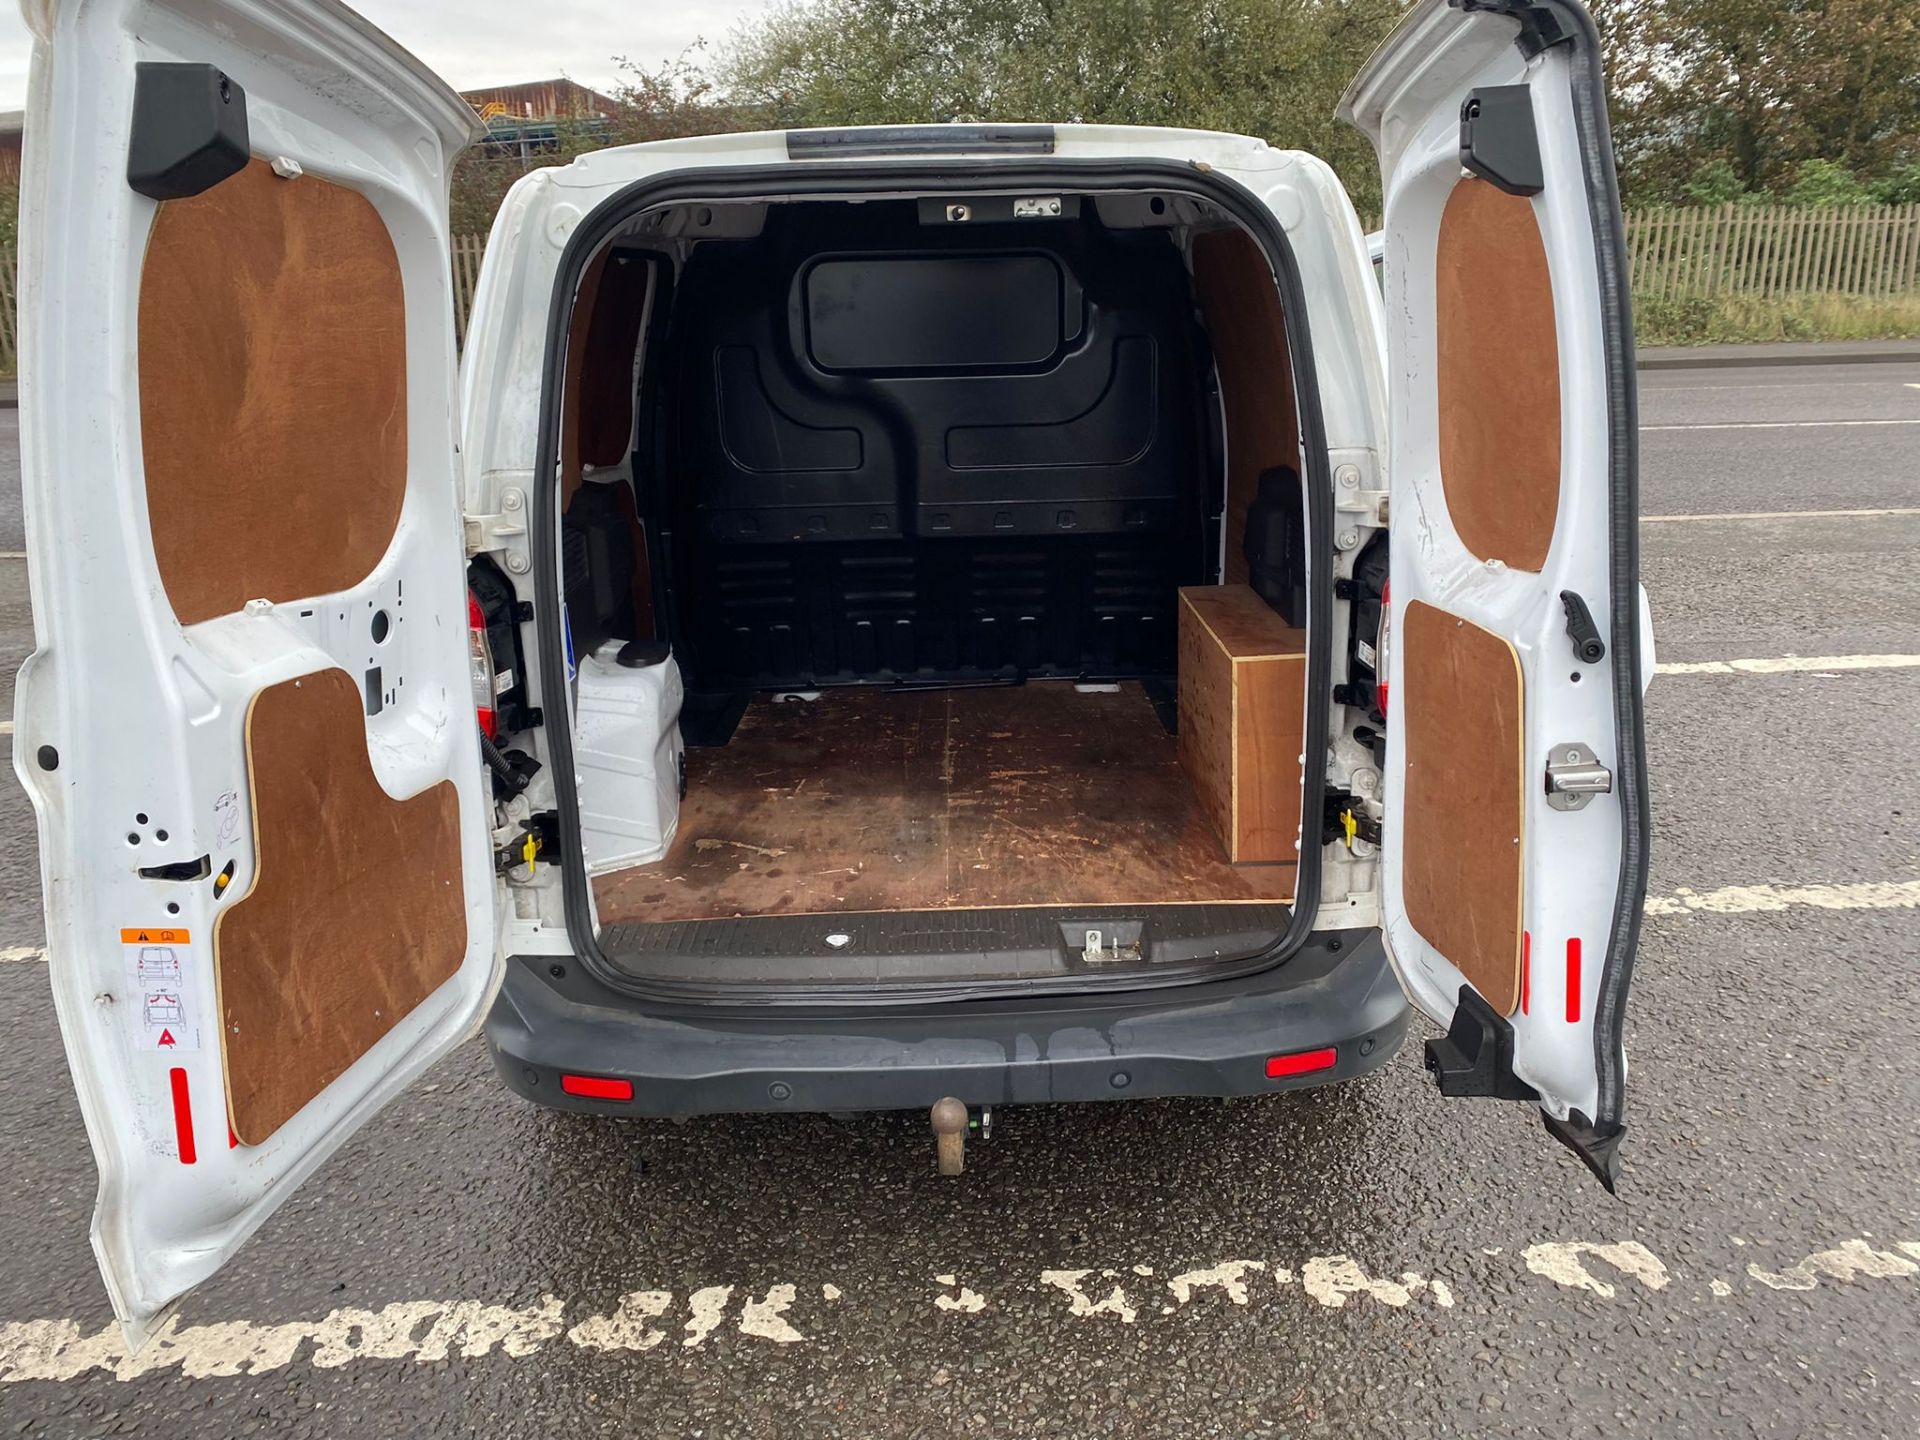 2019 19 FORD TRANSIT COURIER LIMITED PANEL VAN - ALLOY WHEELS - AIR CON - EURO 6. - Image 9 of 10